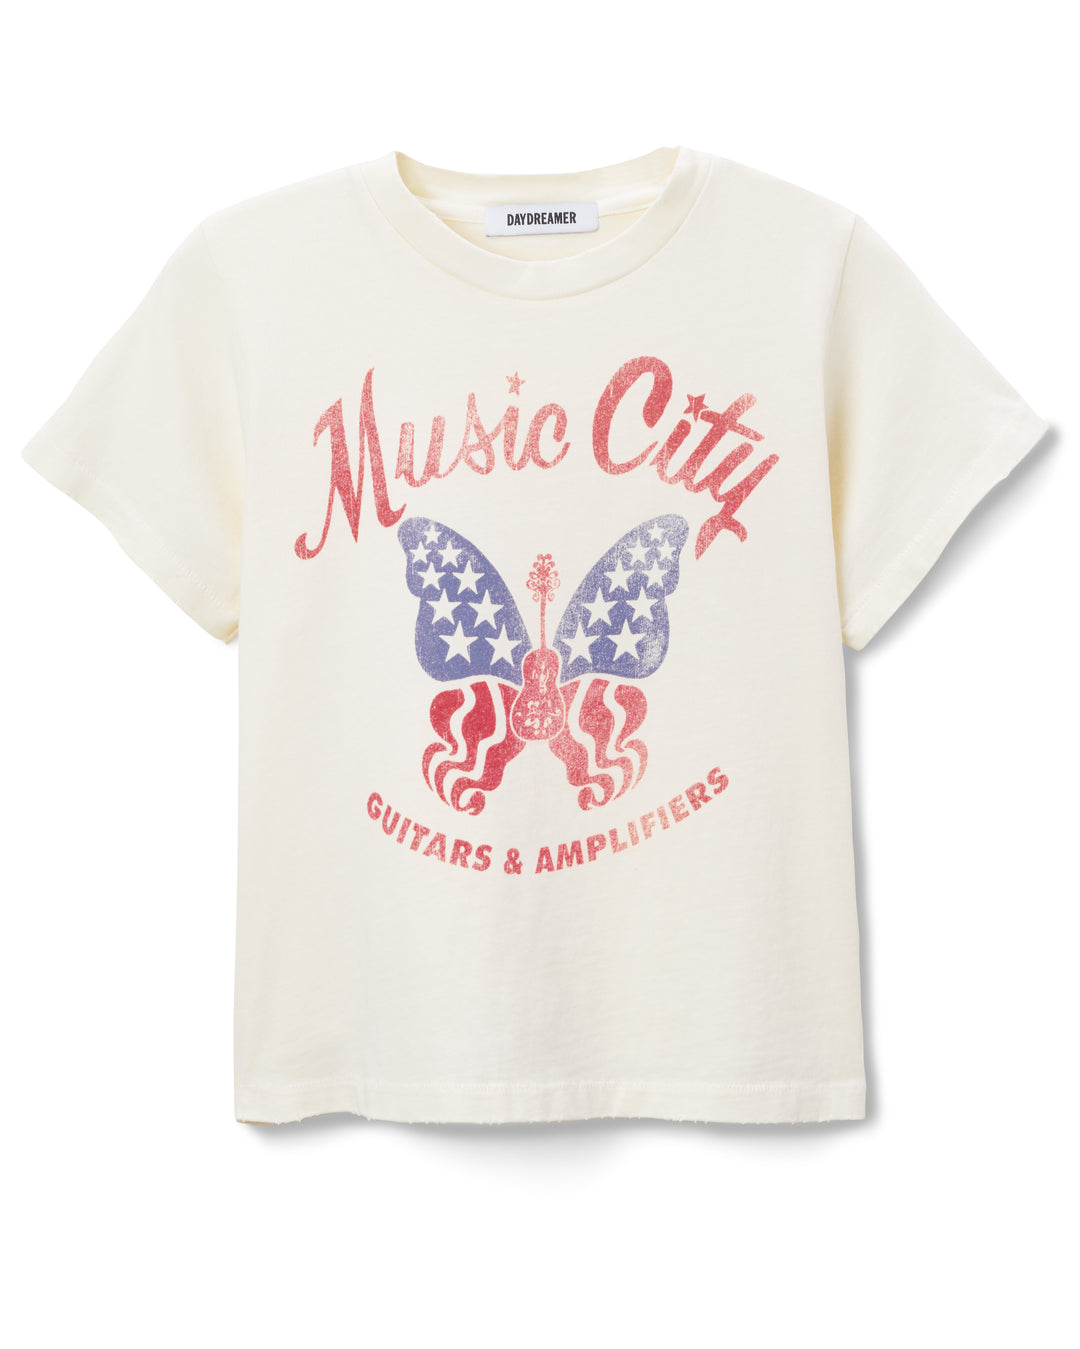 MUSIC CITY BUTTERFLY VINTAGE TEE-STONE VINTAGE - Kingfisher Road - Online Boutique